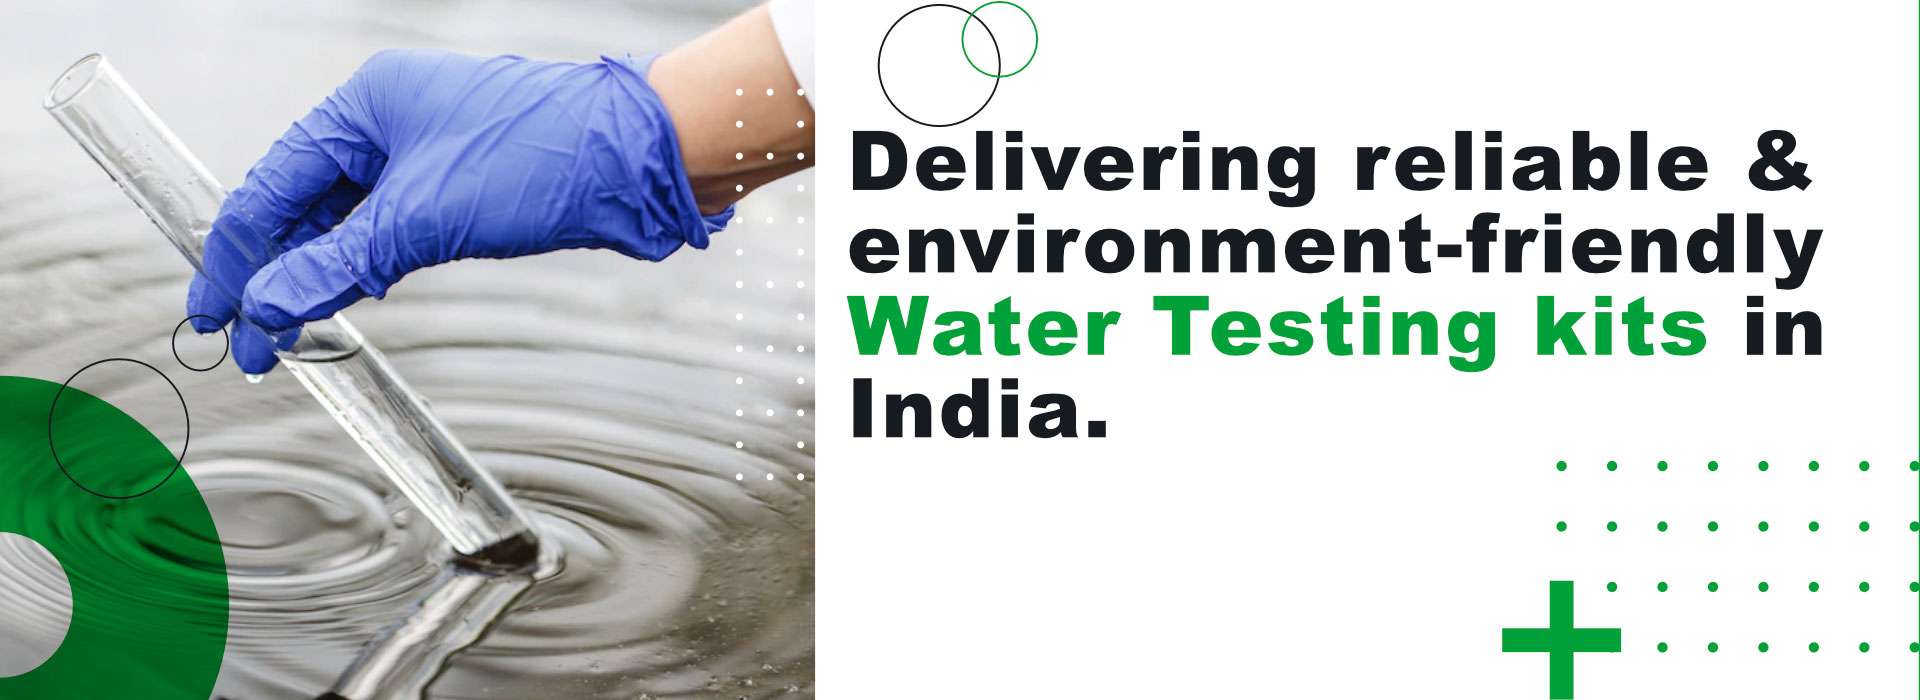  Delivering reliable & environment-friendly water Testing kits in India Manufacturers in Gorakhpur